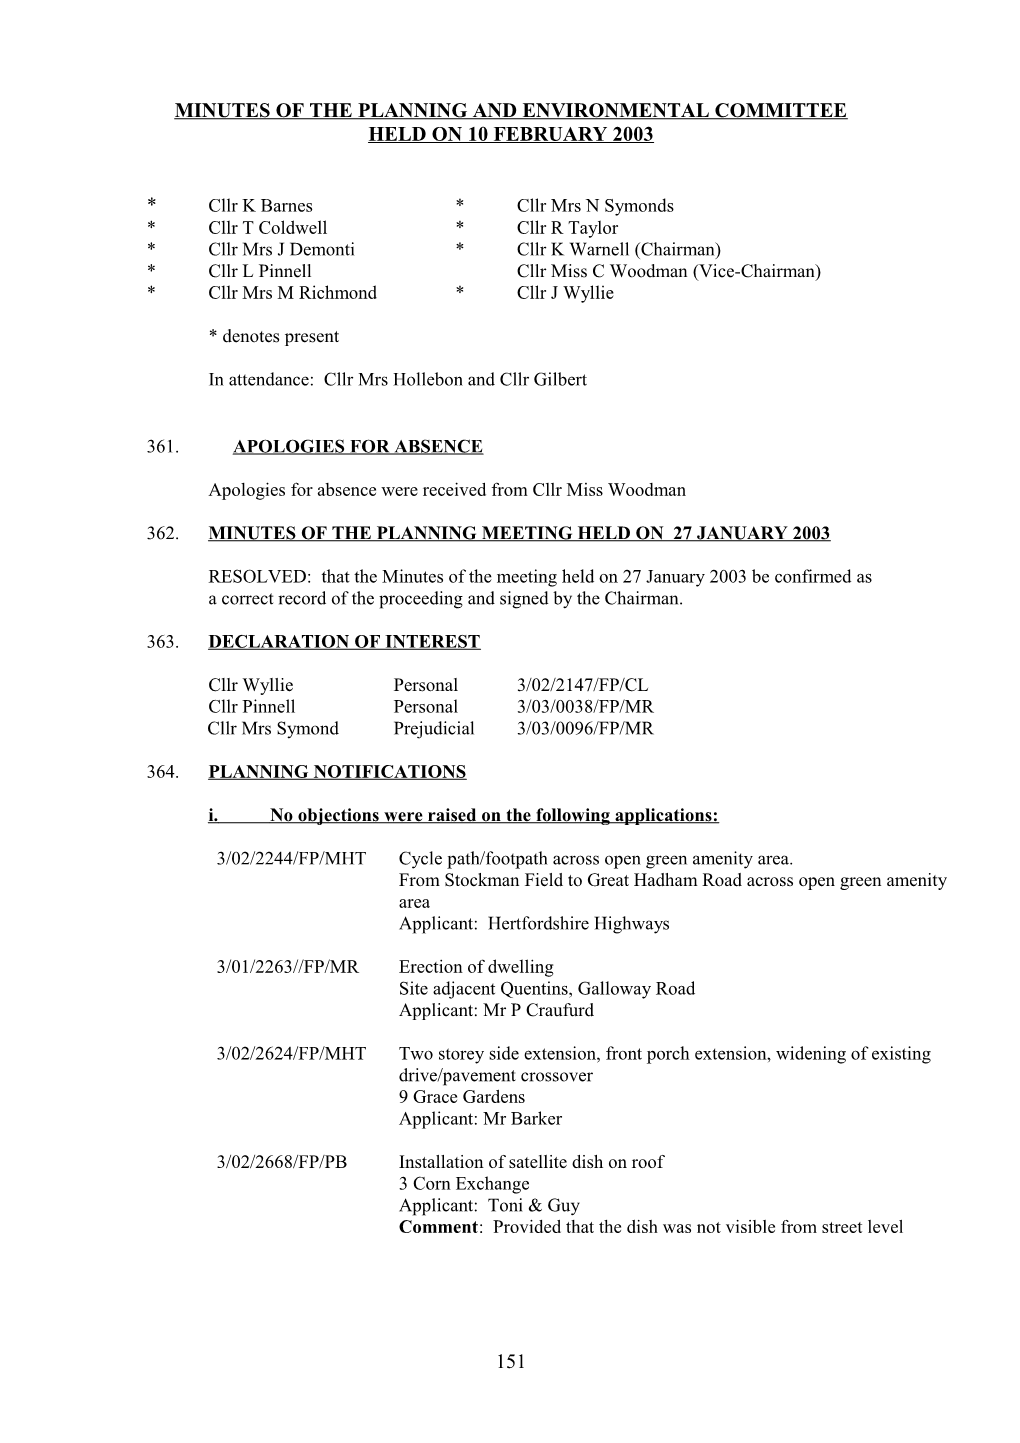 Minutes of the Planning and Environmental Committee Held on 25 November 2002